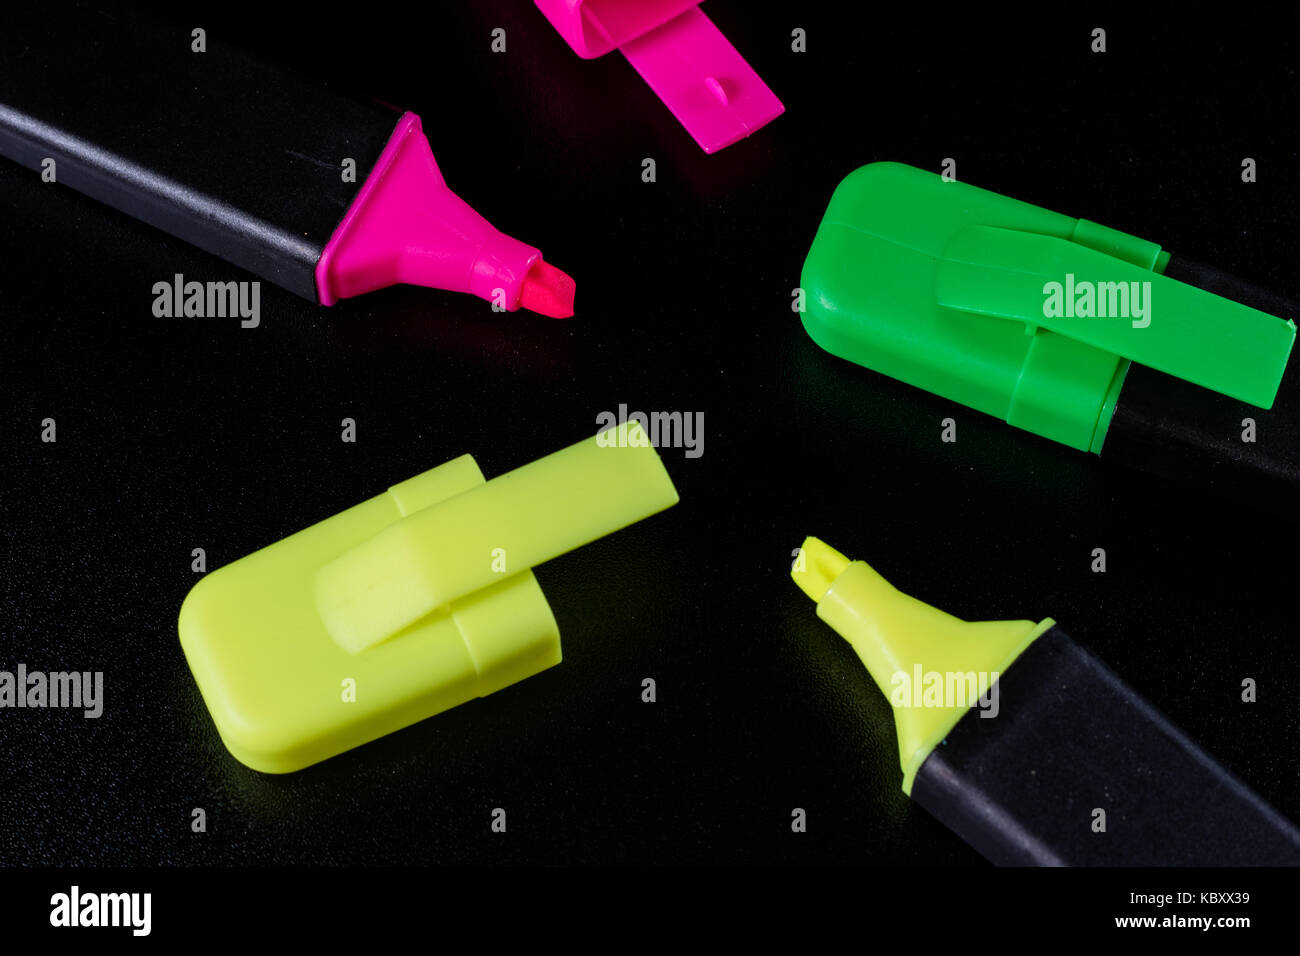 Office Highlighter on a black background. Office Mazak to draw are lying on a black countertop. Black background. Stock Photo